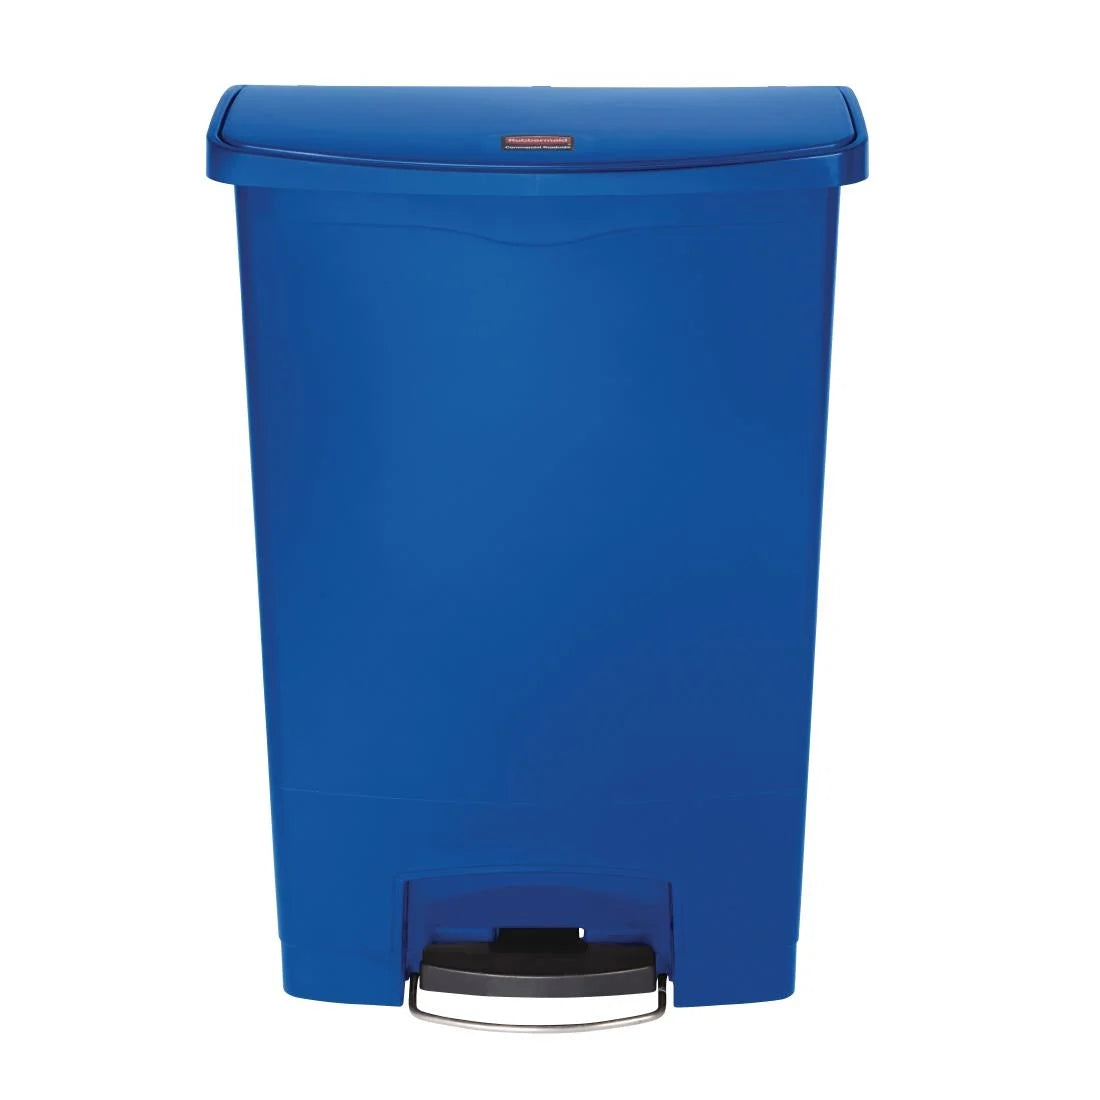 Rubbermaid Slim Jim Step on Bin Front Pedal 90Ltr Blue.Product Ref:00698.Model:CW592 . 🚚 1-3 Days Delivery